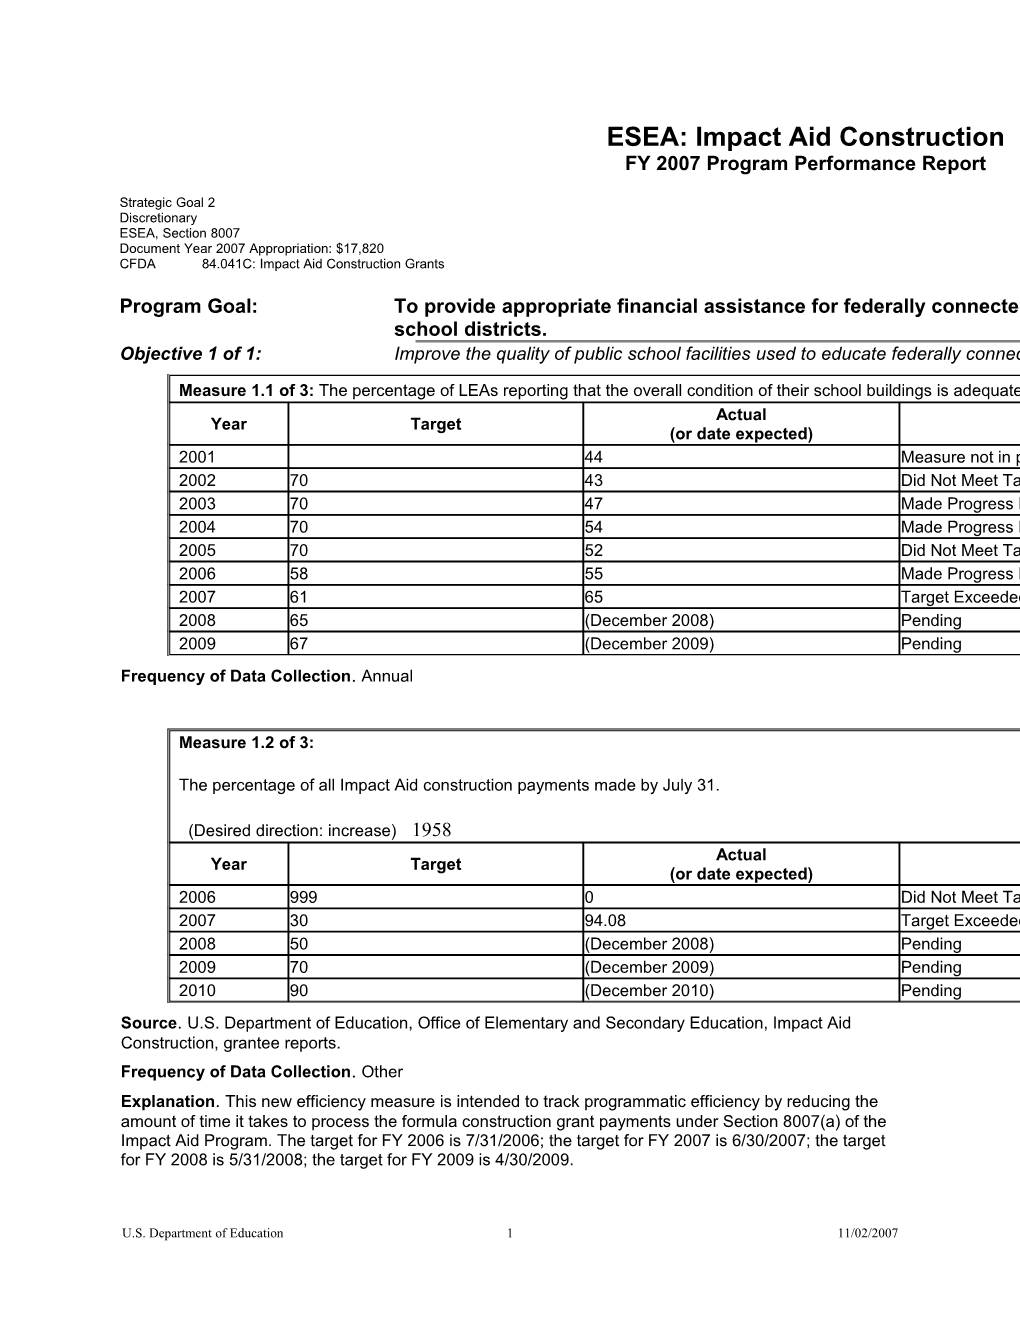 Impact Aid Construction FY 2007 Program Performance Report (MS Word)